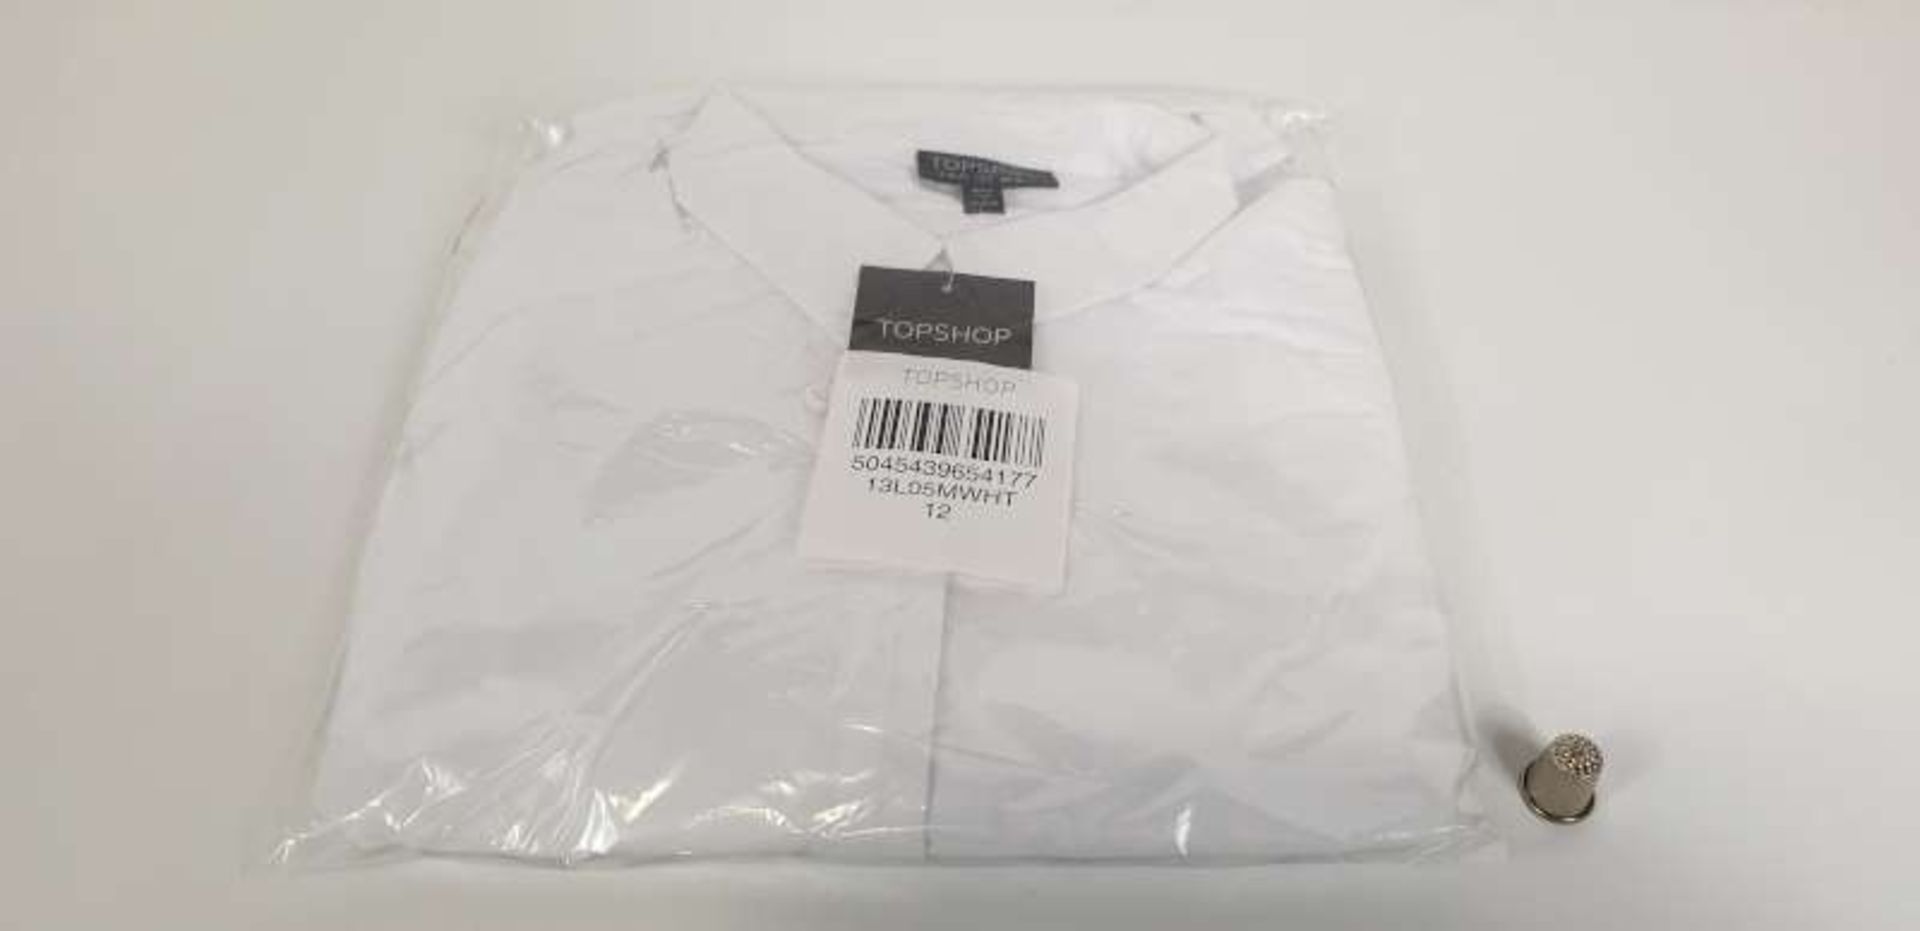 20 X BRAND NEW TOPSHOP CORSET SHIRTS IN VARIOUS SIZES, RRP OF EACH ITEM £34.00